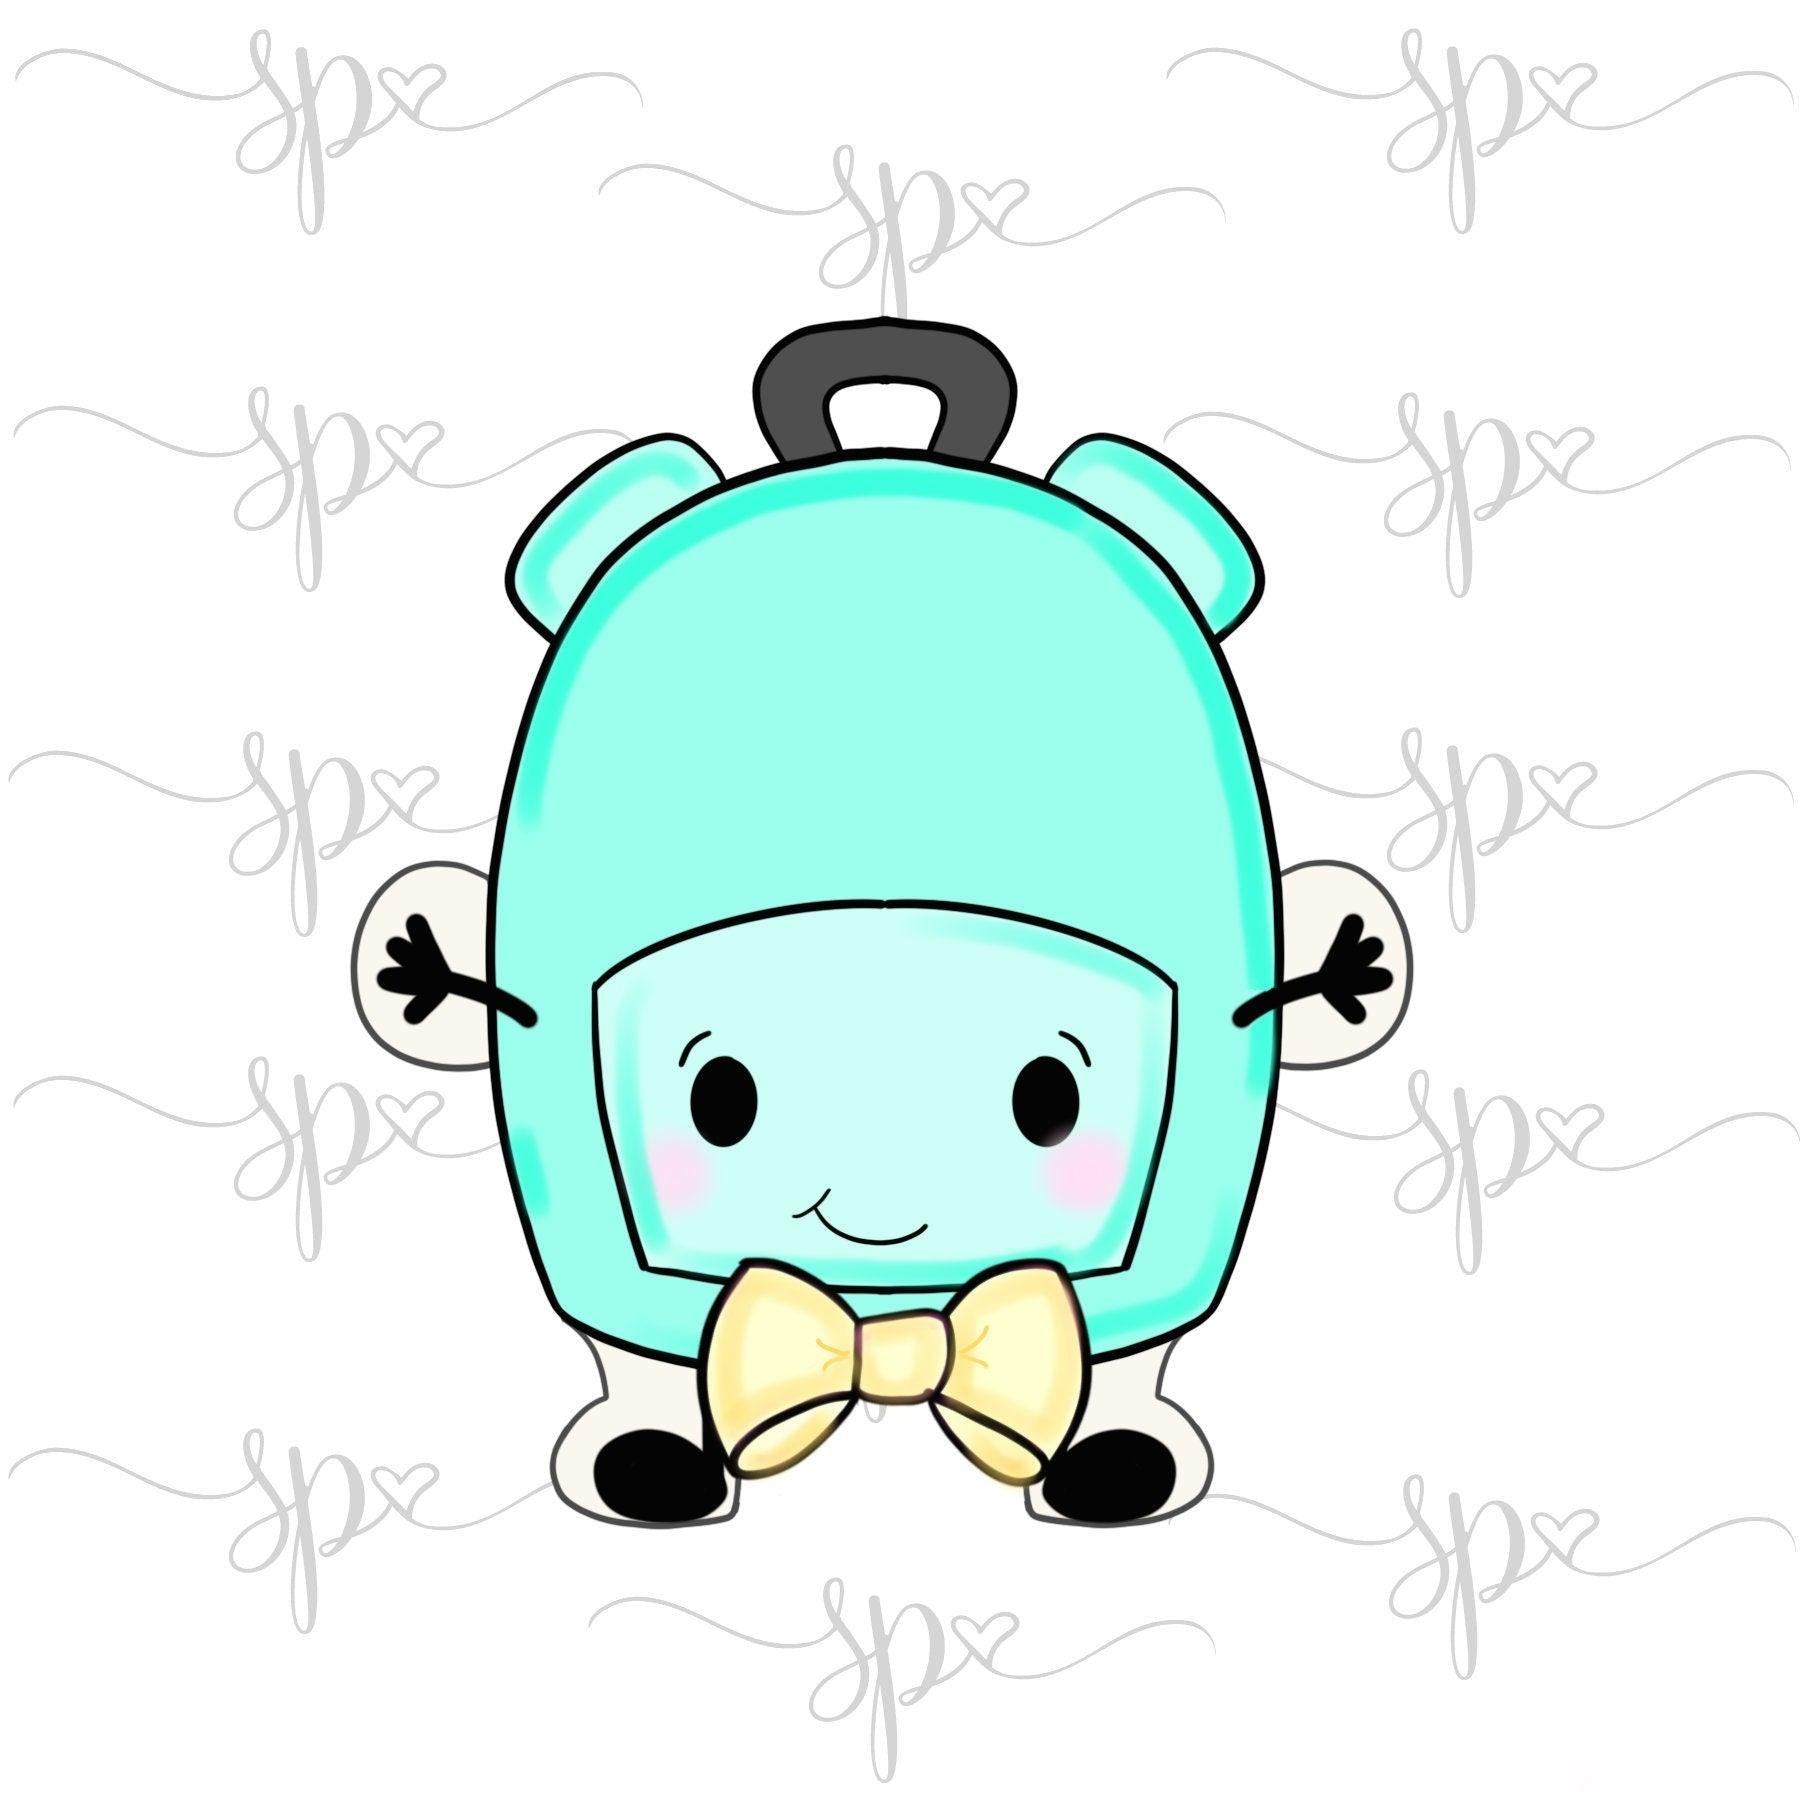 Bow Tie Backpack Kid Cookie Cutter - Sweetleigh 